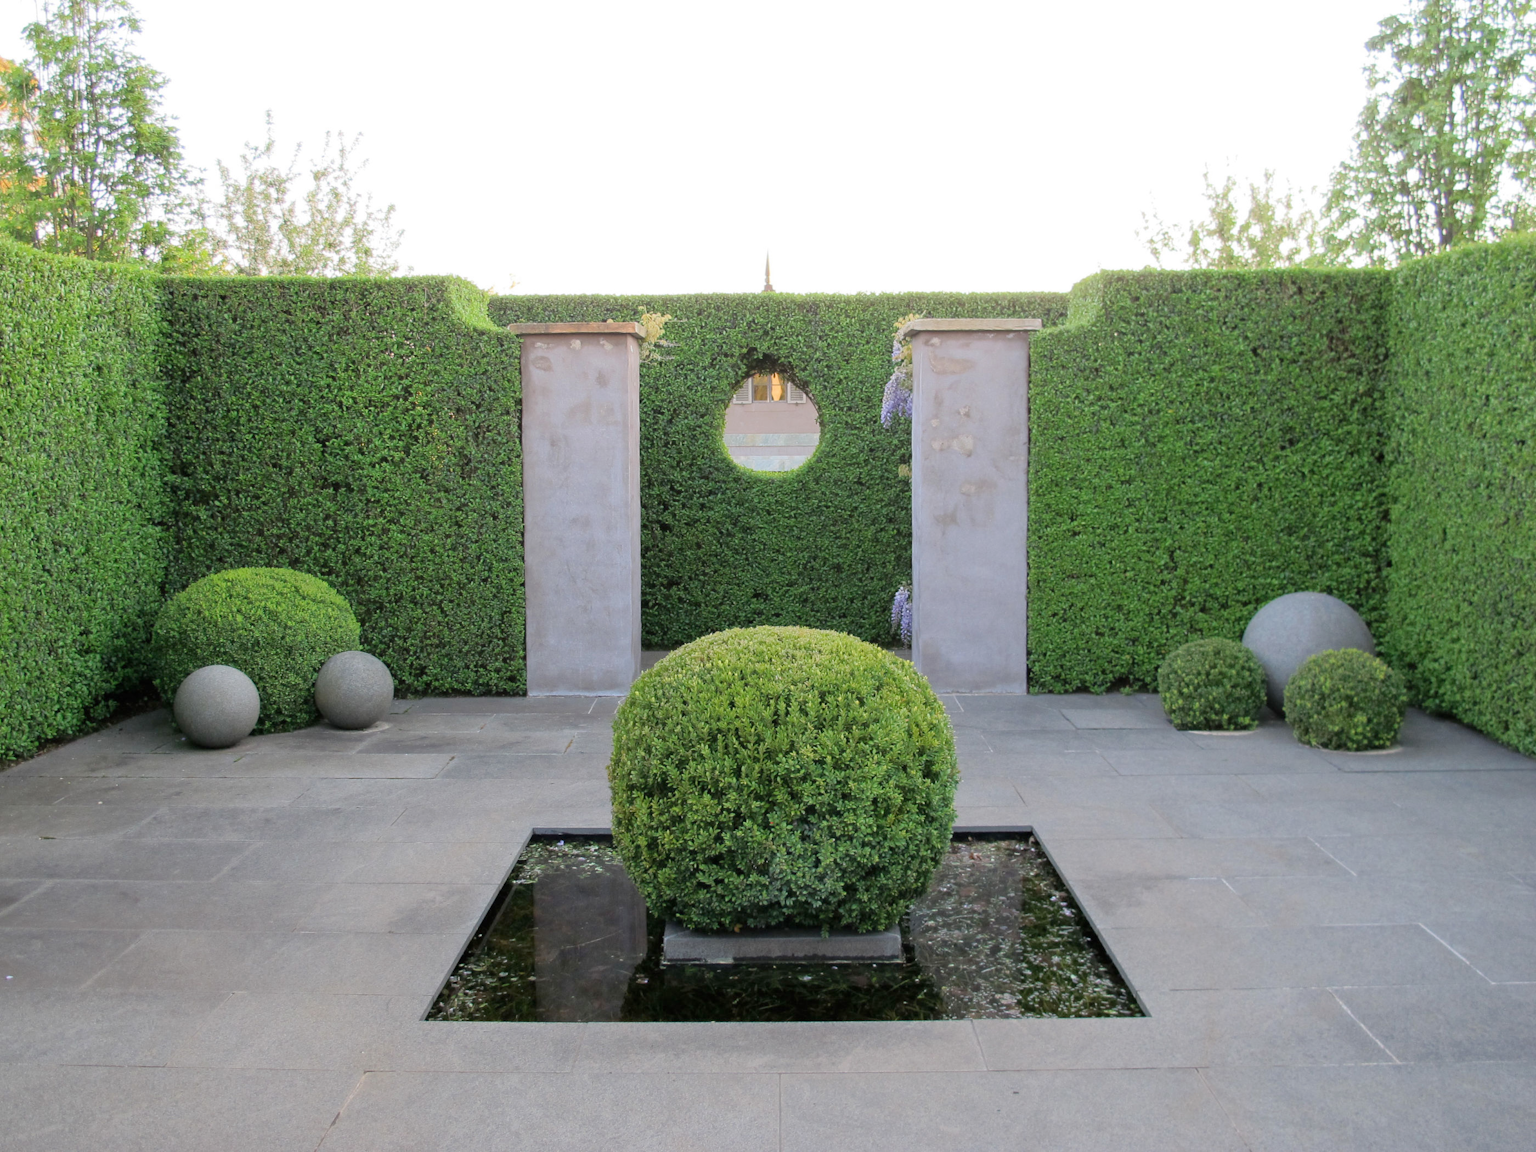 Paul Bangay's residence and manicured gardens at Stonefields using Raven granite paving